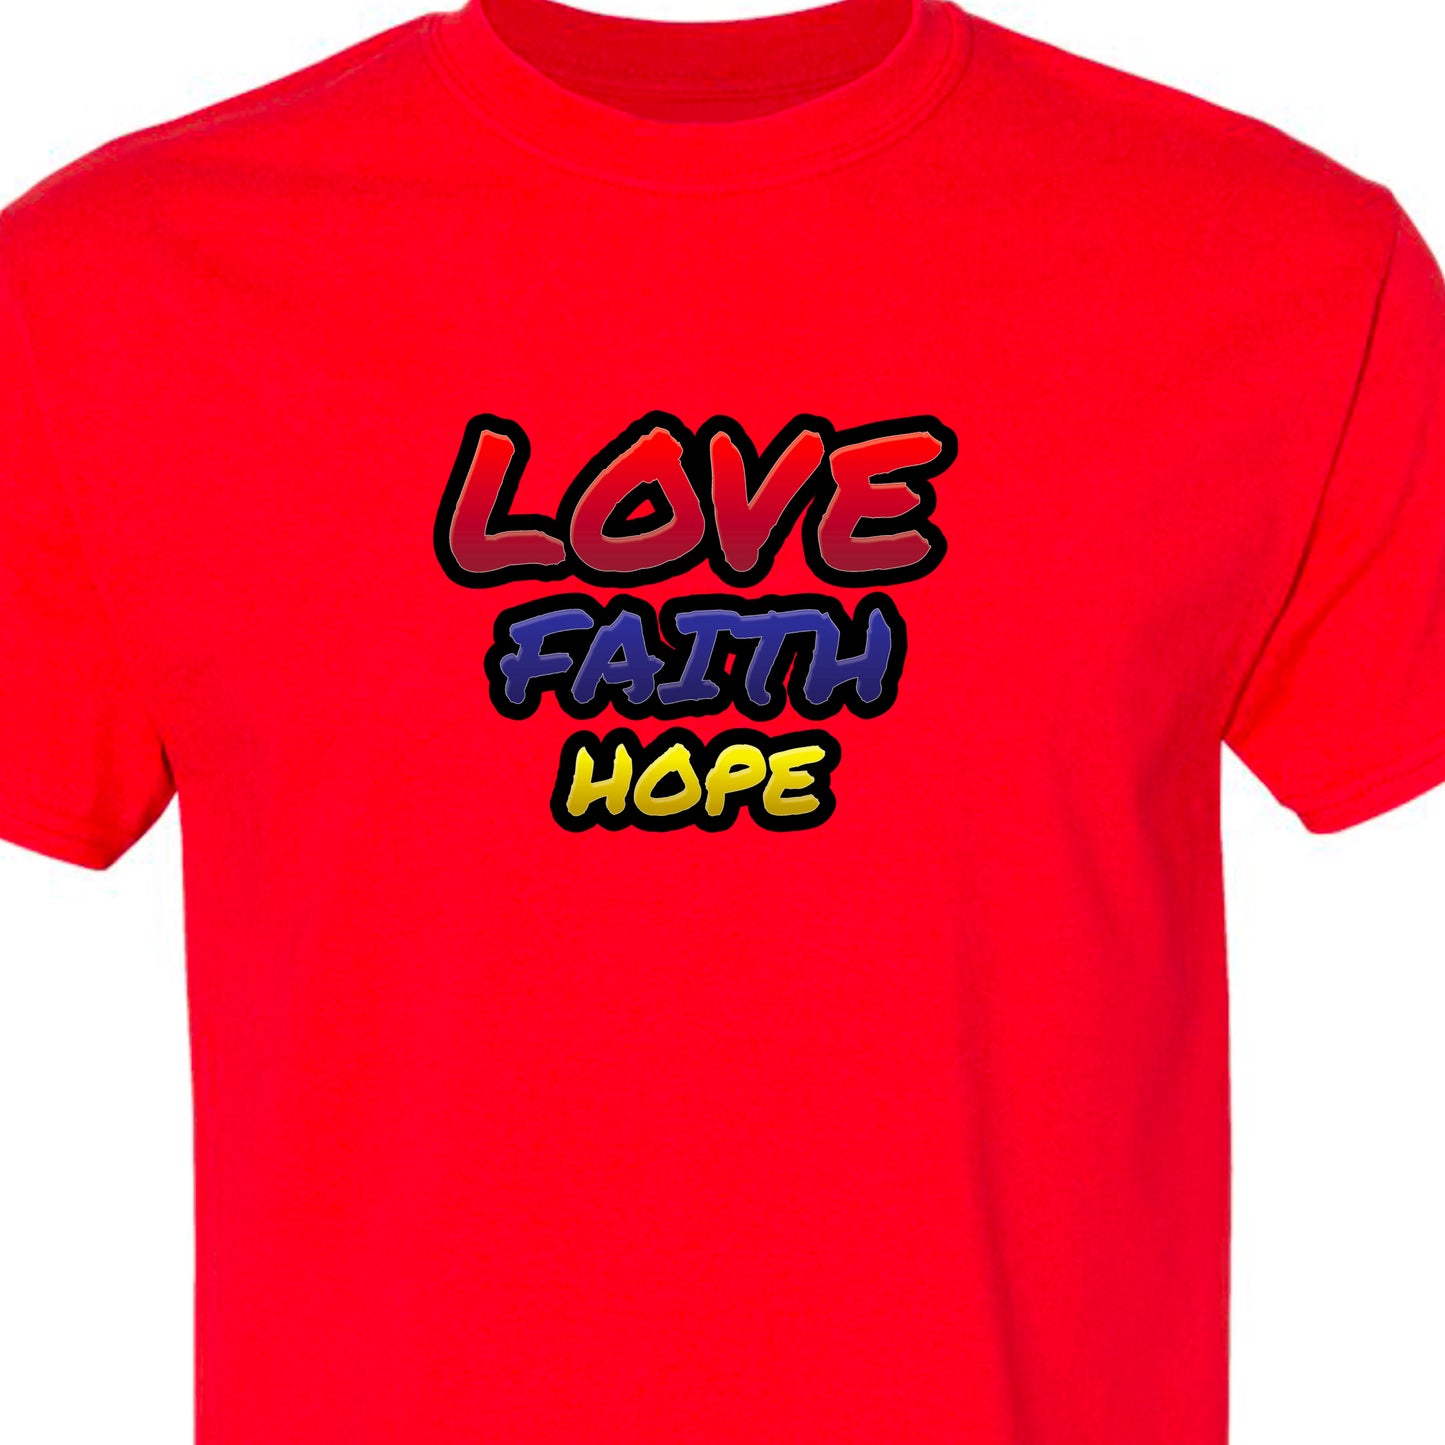 Love is the Greatest Short Sleeved TShirt